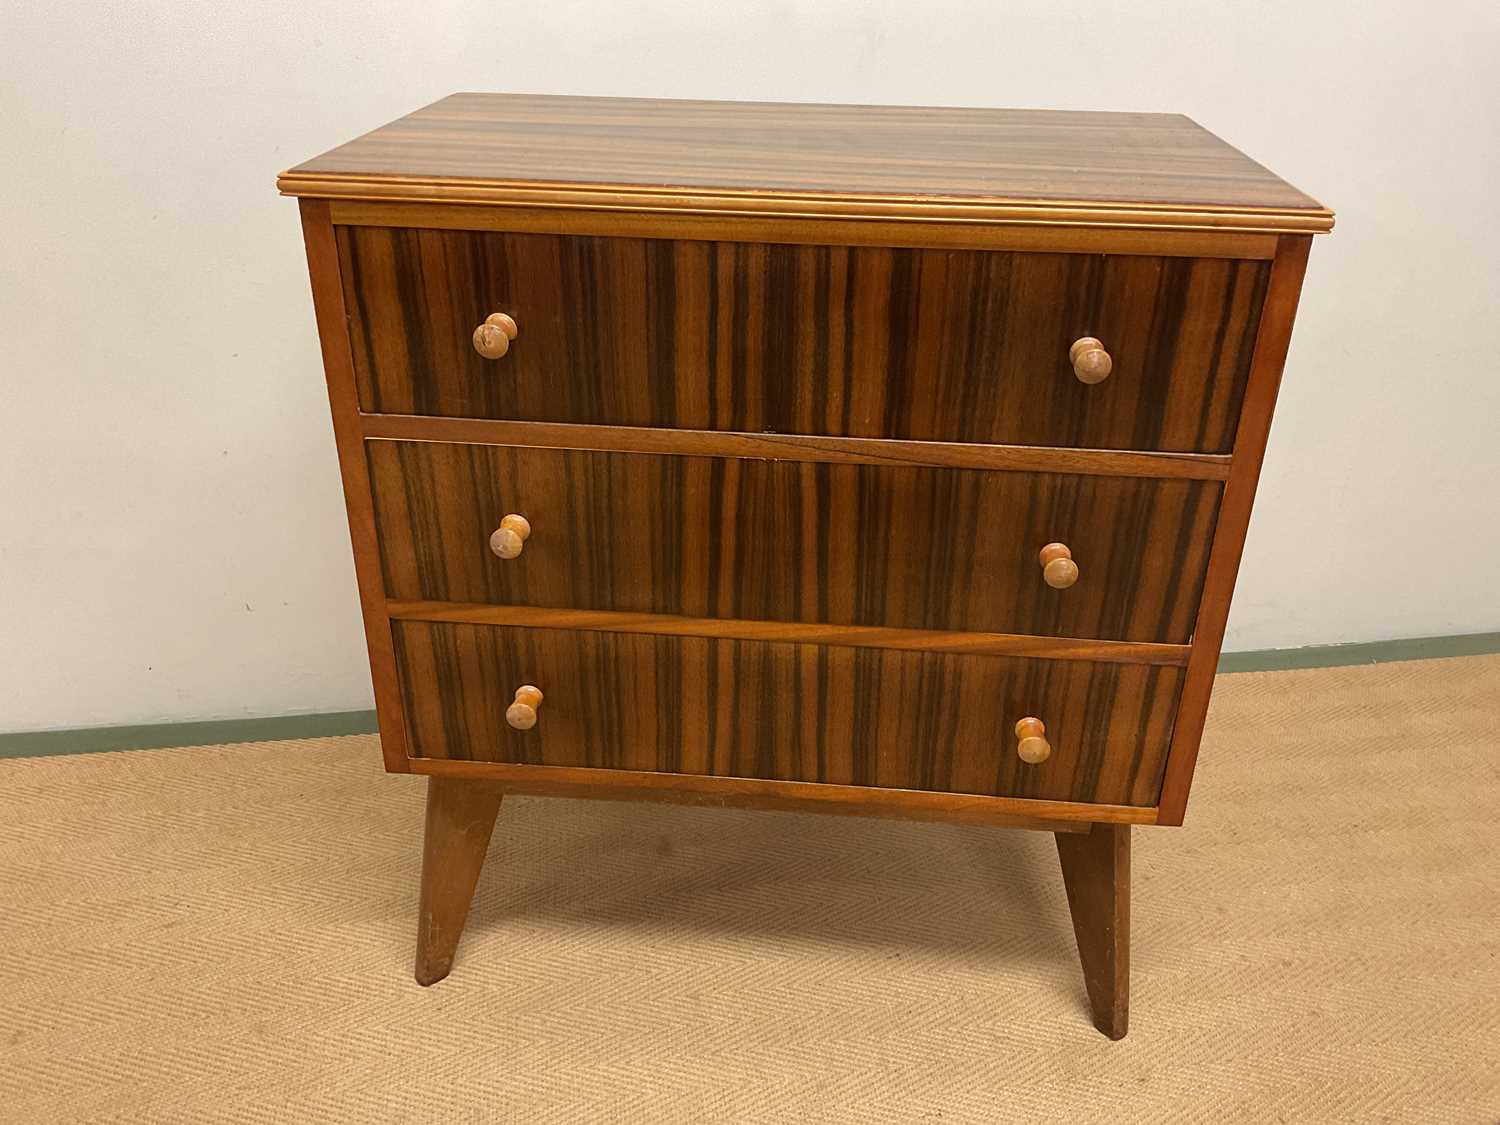 MORRIS OF GLASGOW; a Cumbrae chest of drawers, by Neil Morrisin the 1970s, on raised legs with three